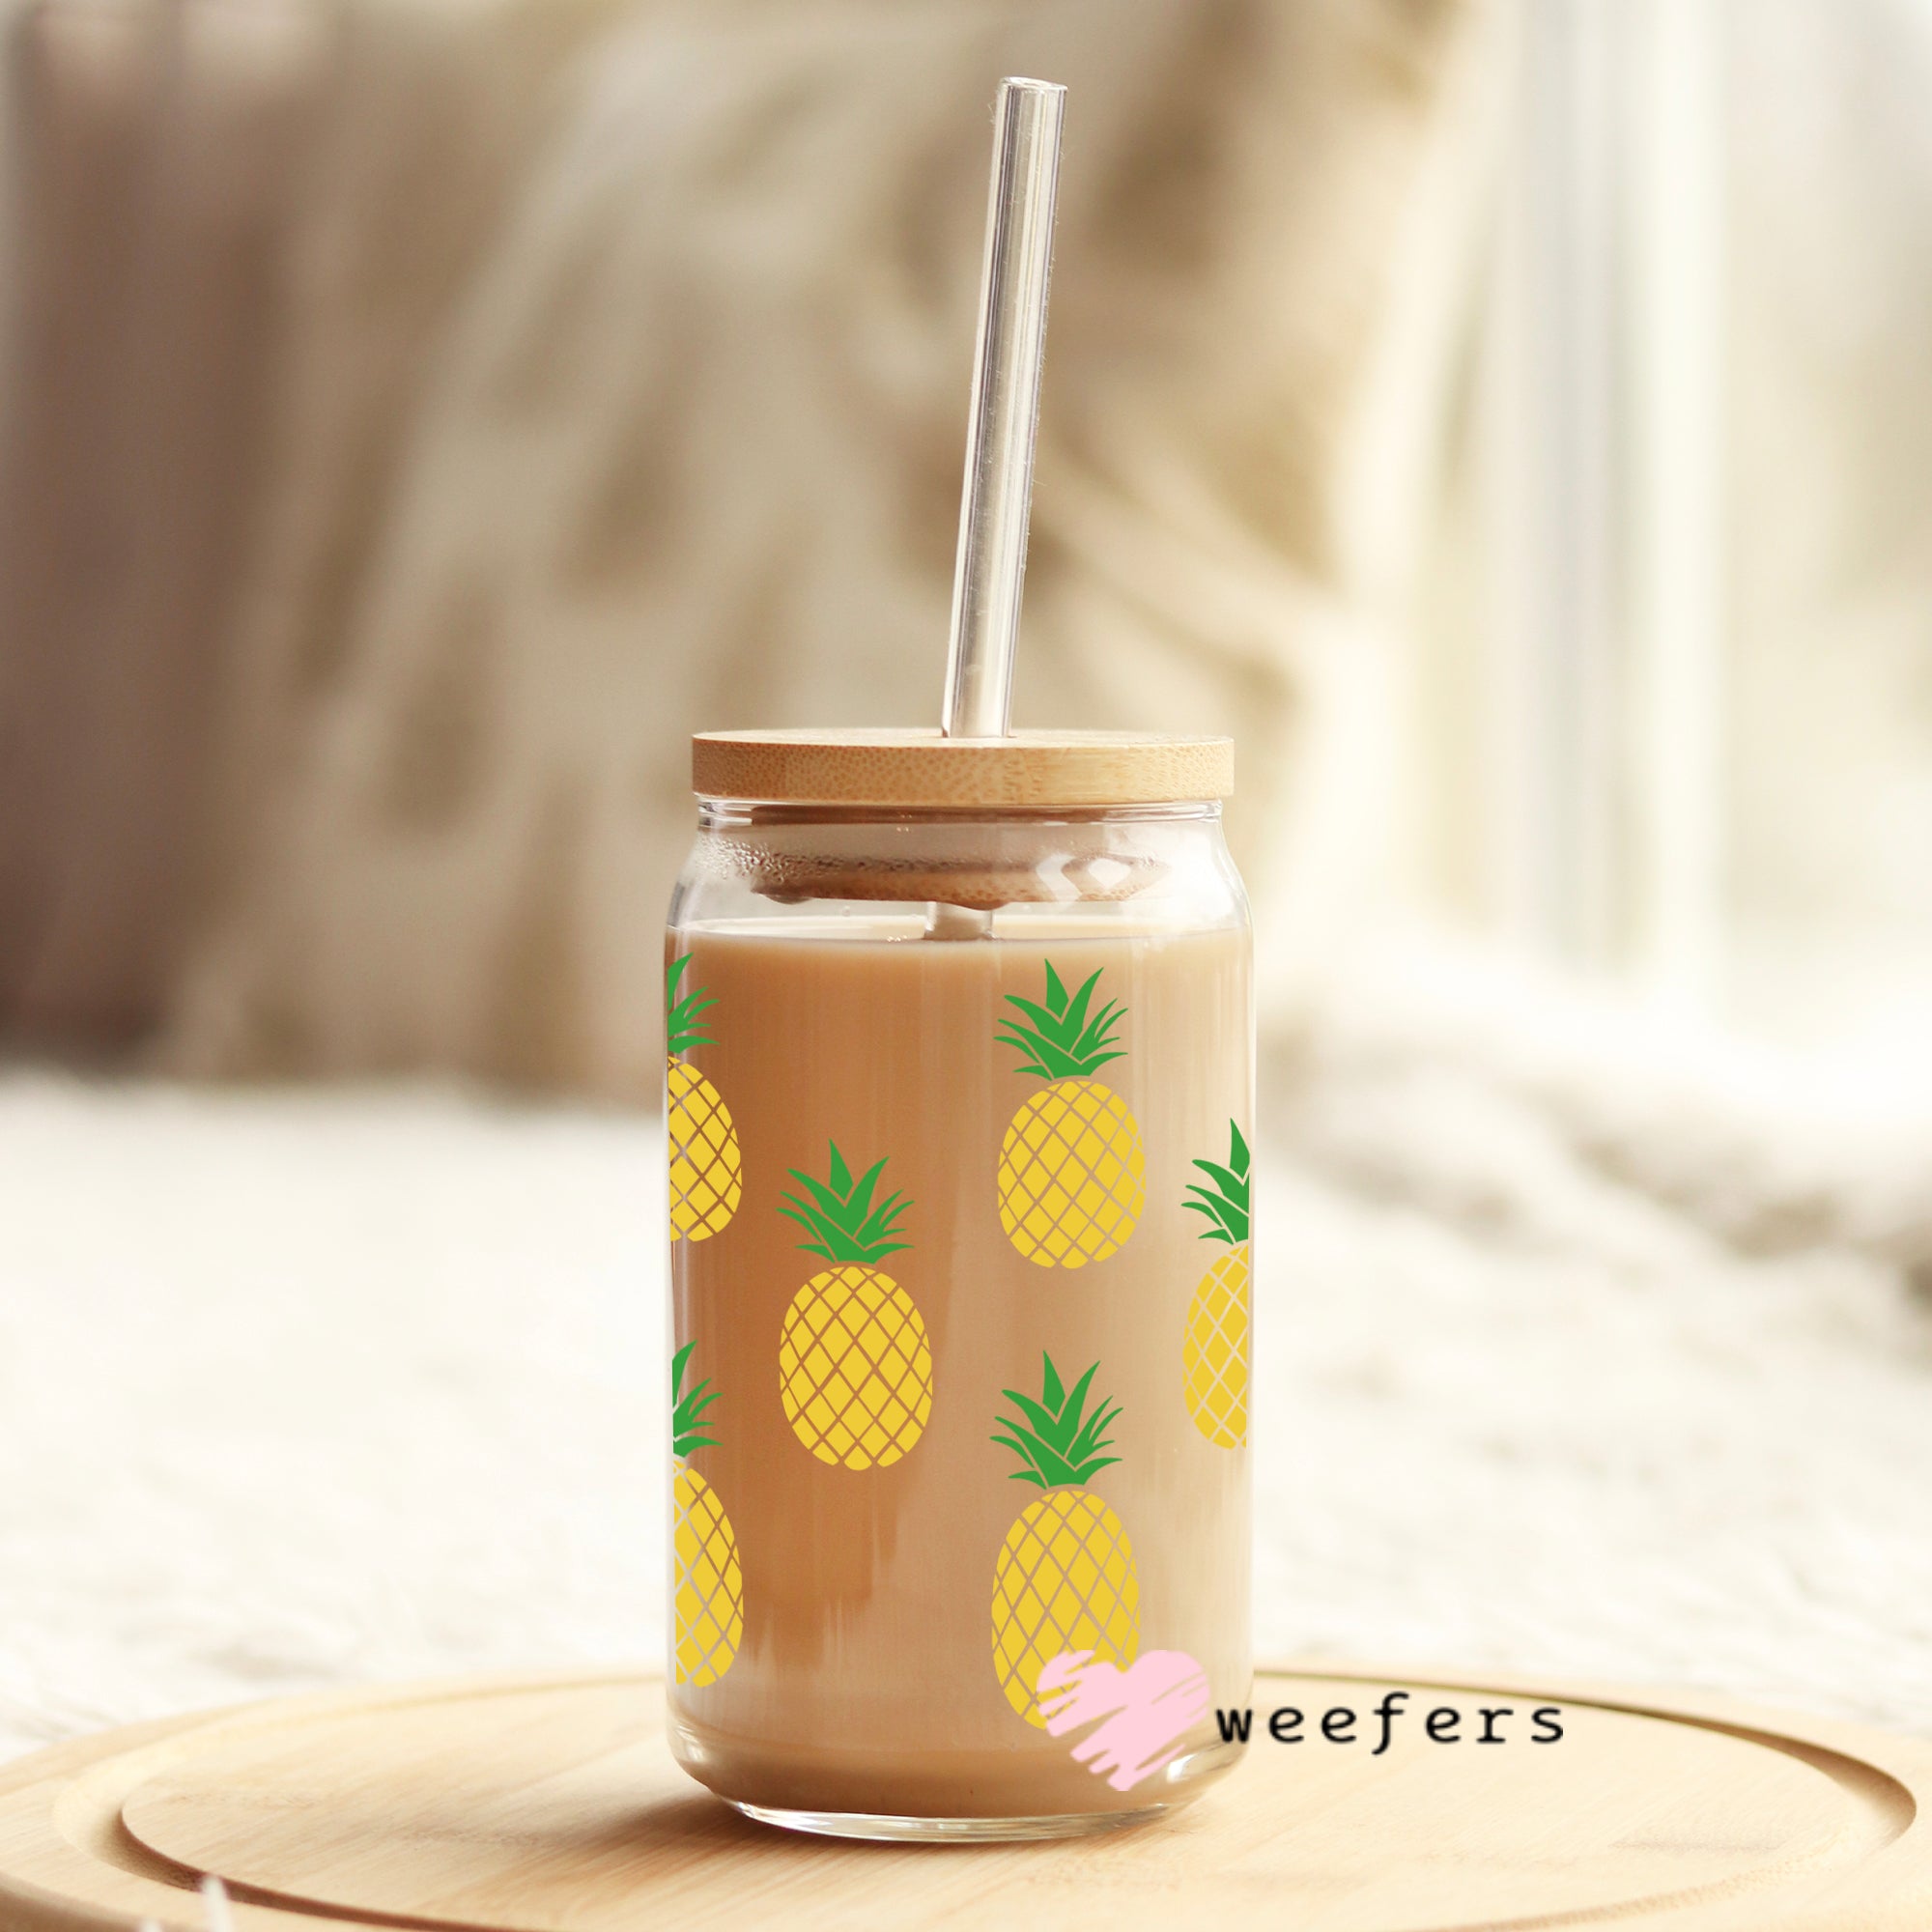 DTF UV Cup Wraps | Transfers | Libbey 16 oz Glass Cans | Pineapples | Fruit  | Tropical | Summer